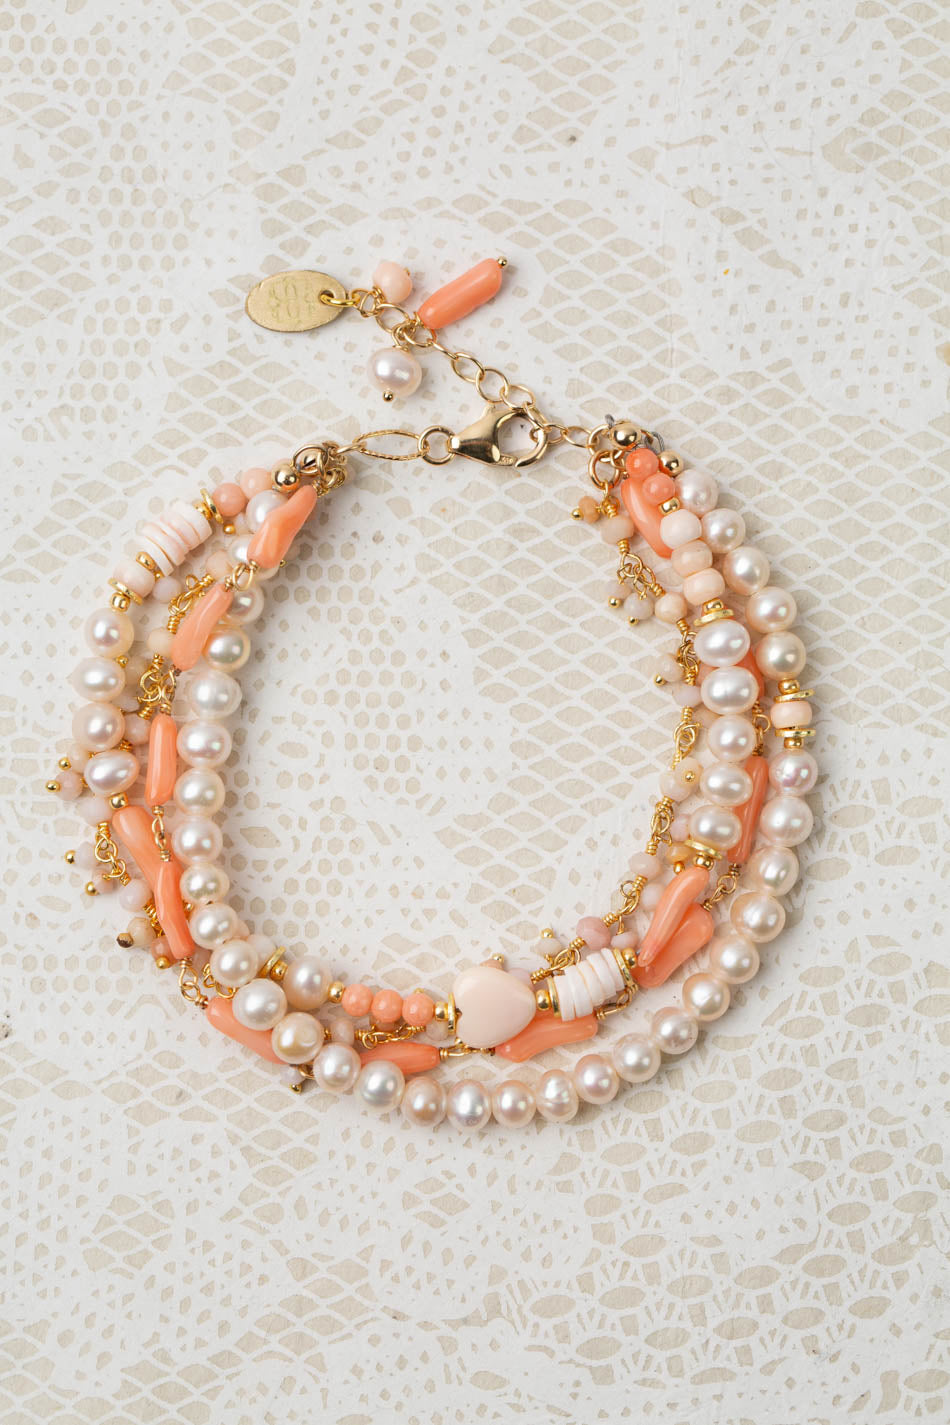 One Of A Kind 7.5-8.5" Pink Conch Shell, Freshwater Pearl, Shell Multistrand Bracelet